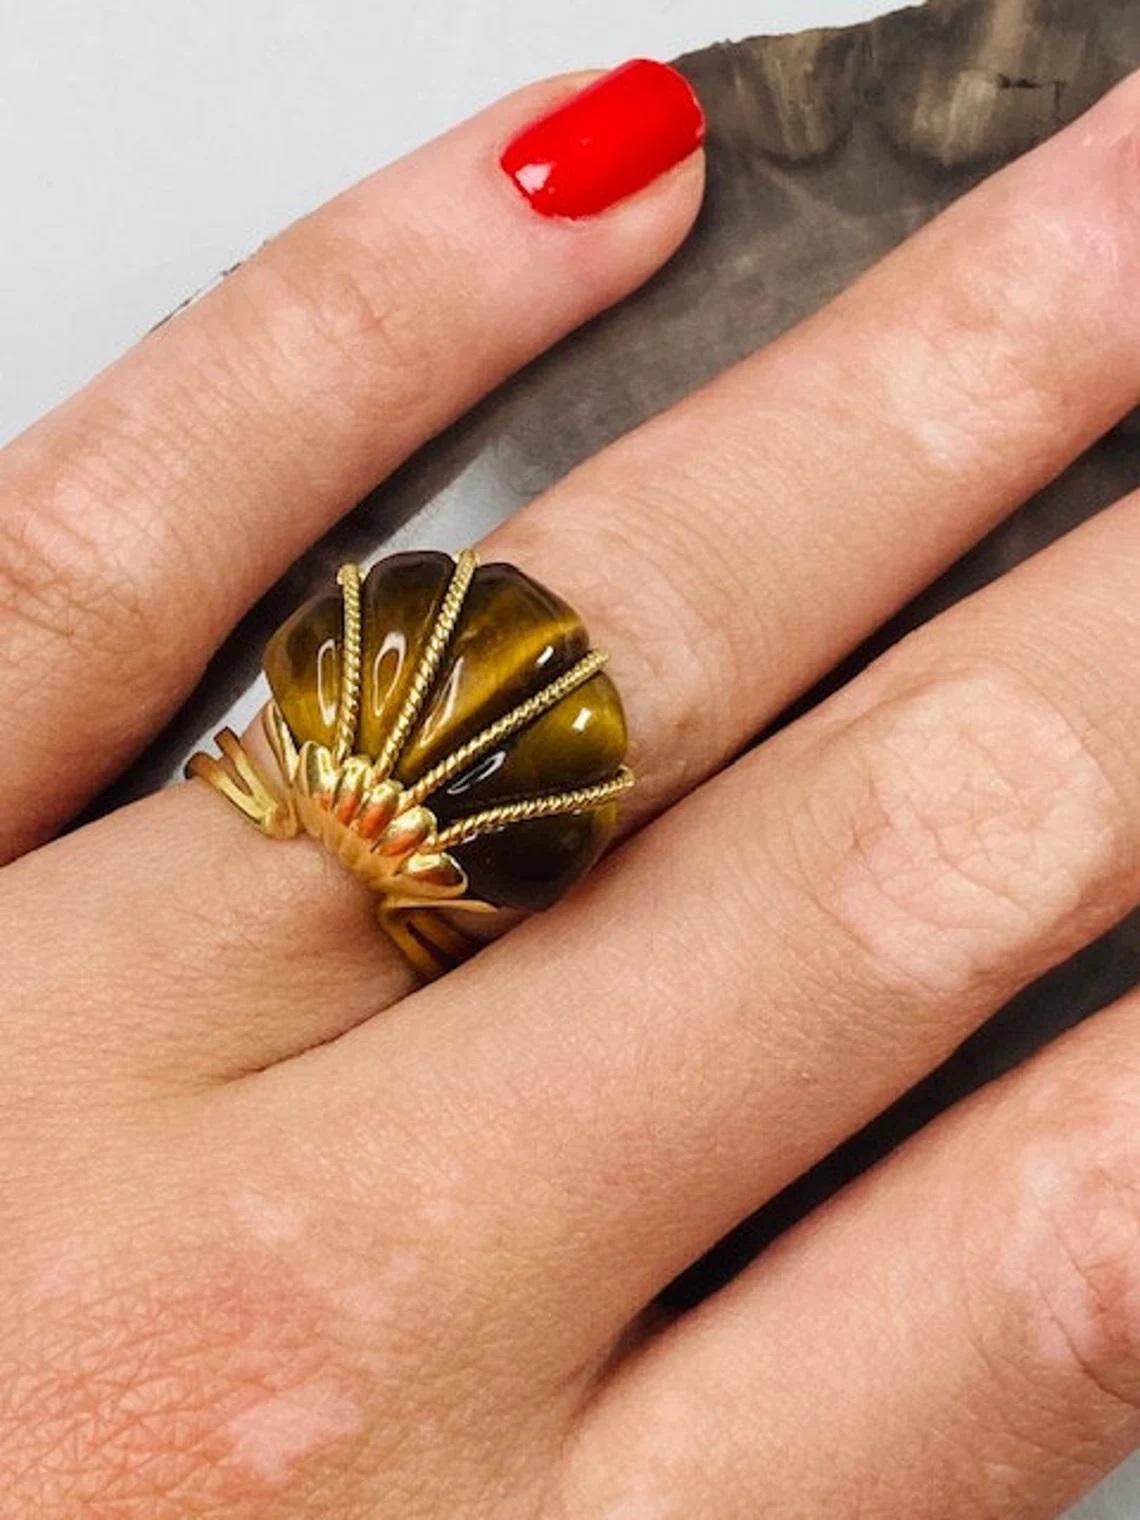 Vintage 14k Gold Tiger's Eye Ring One-of-a-kind

This vintage cushioned tiger's eye ring with 14k gold details and band is a striking yet wearable piece, perfect for any occasion. Made in the 1980s, this ring comfortably fits a size M